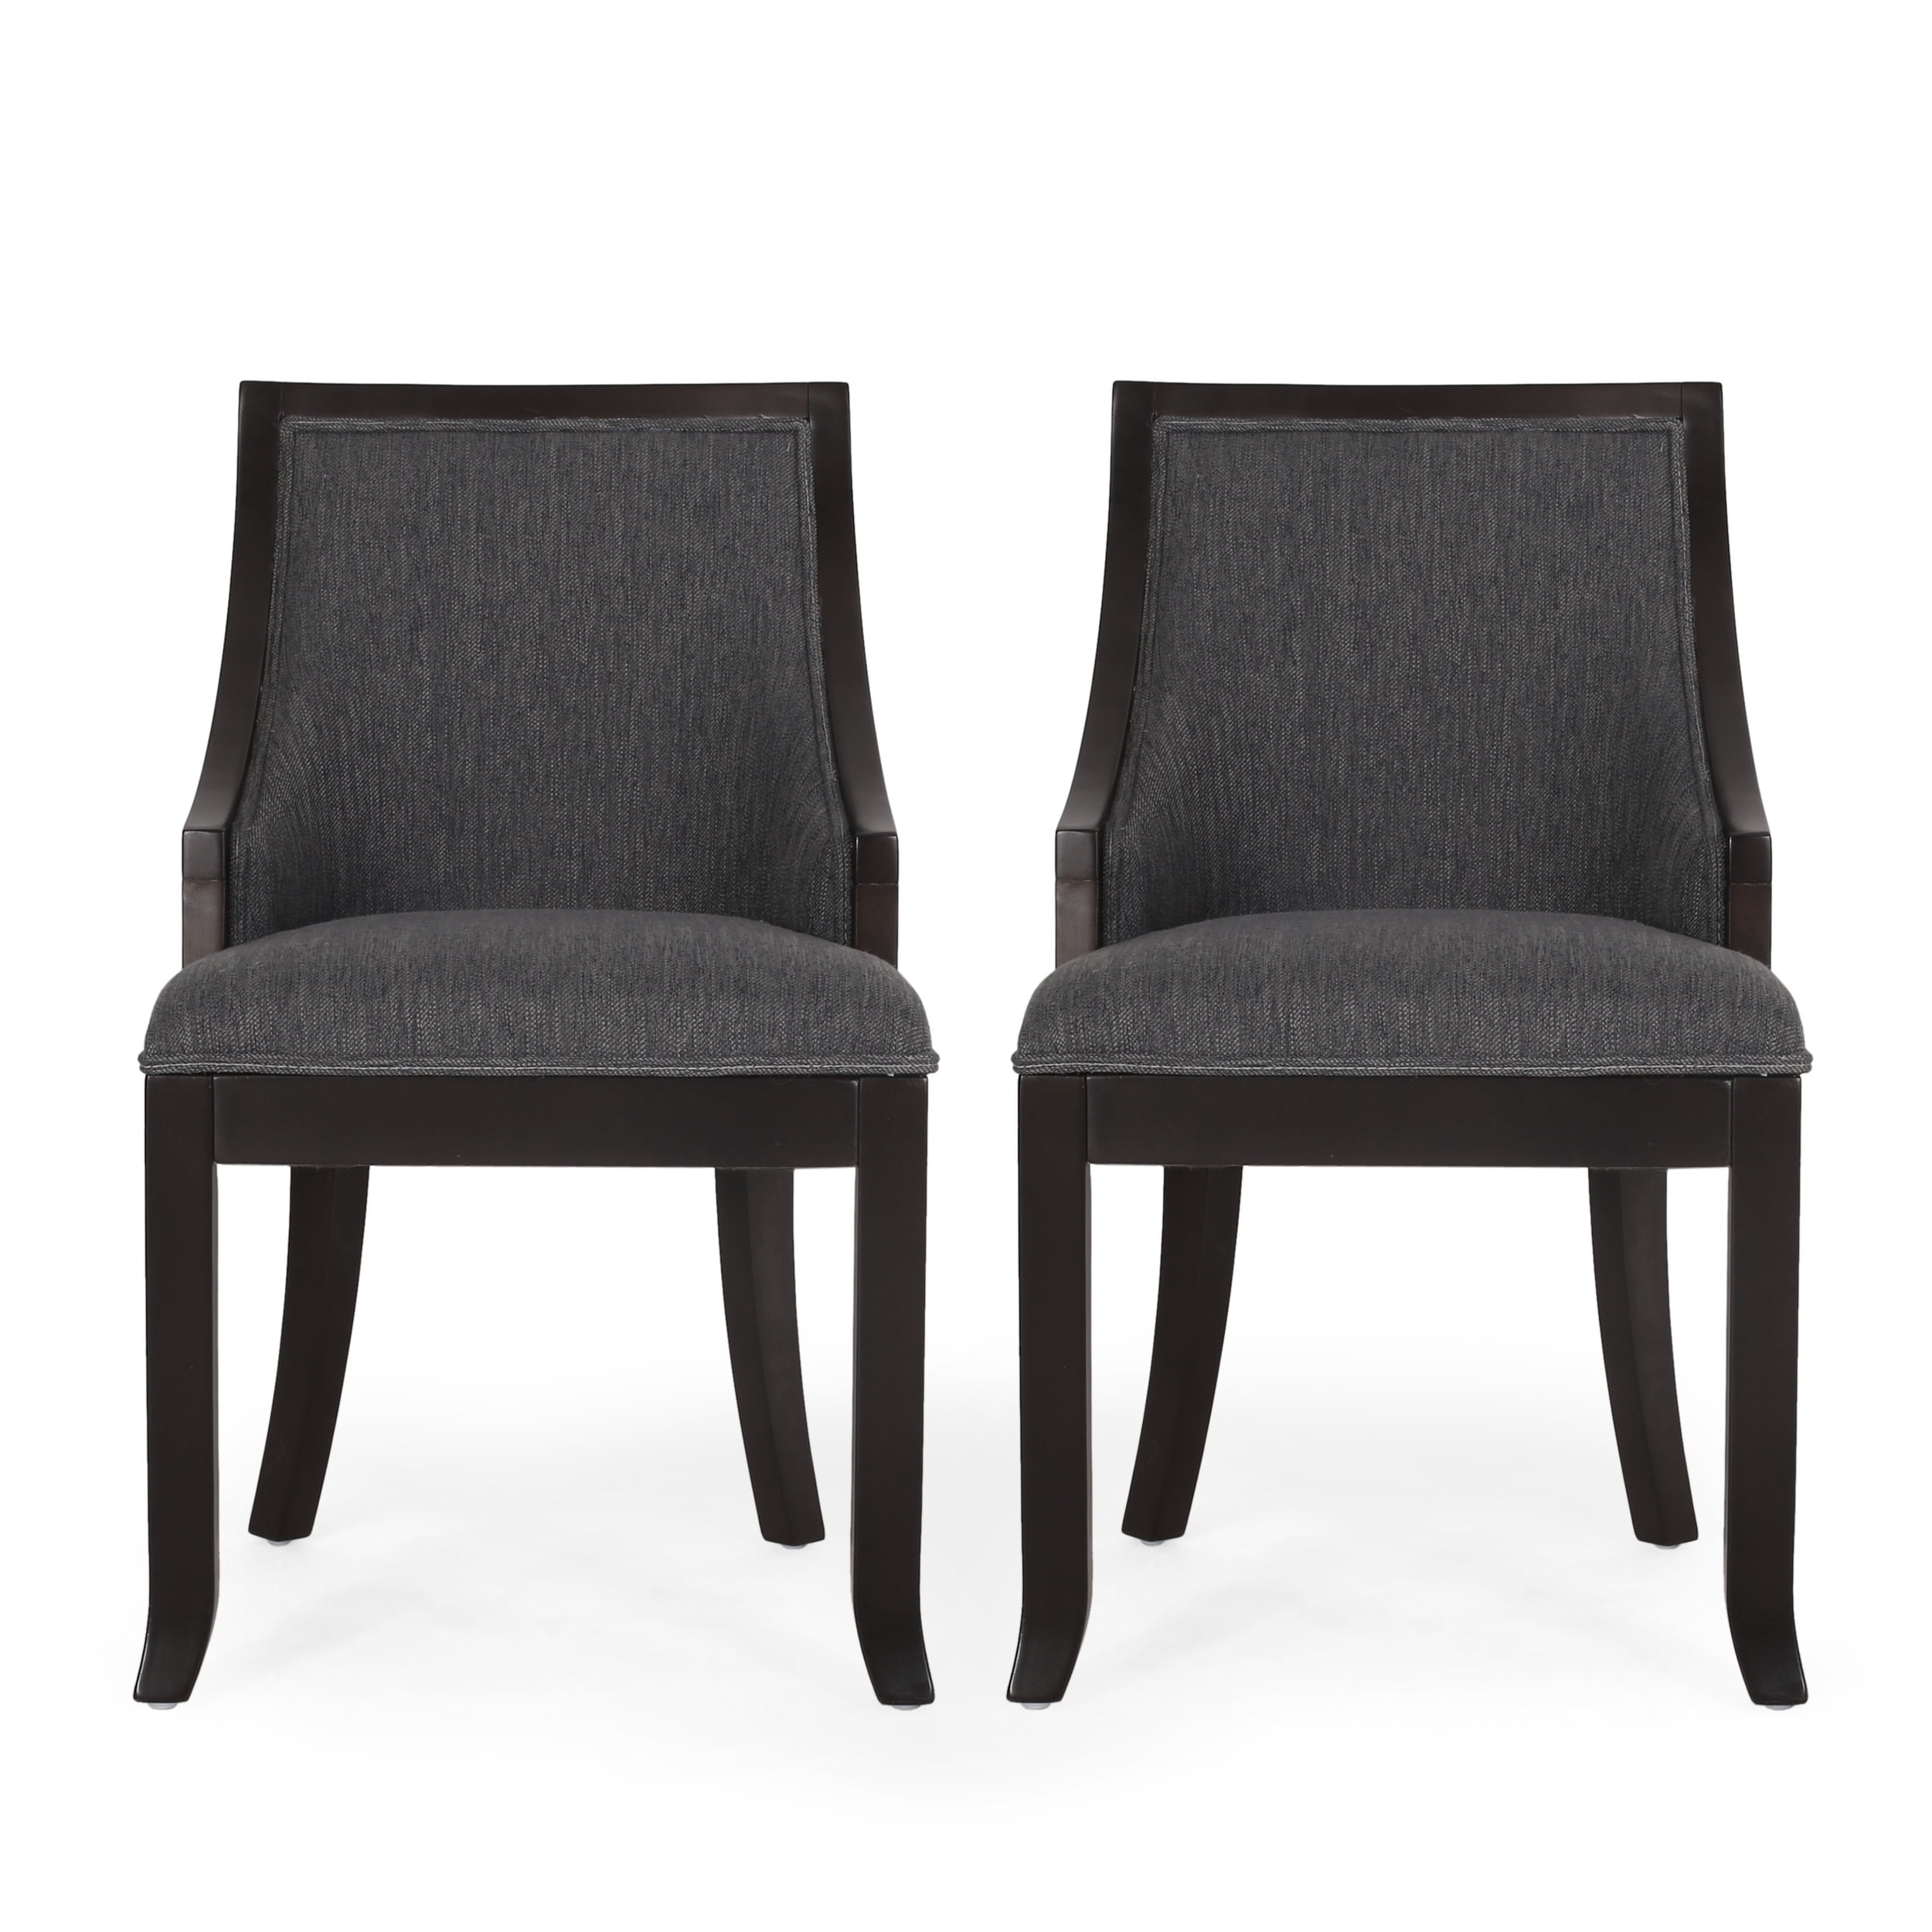 Noble House Newell Fabric Upholstered Birch Wood Dining Chairs, Set of 2, Navy Blue and Walnut